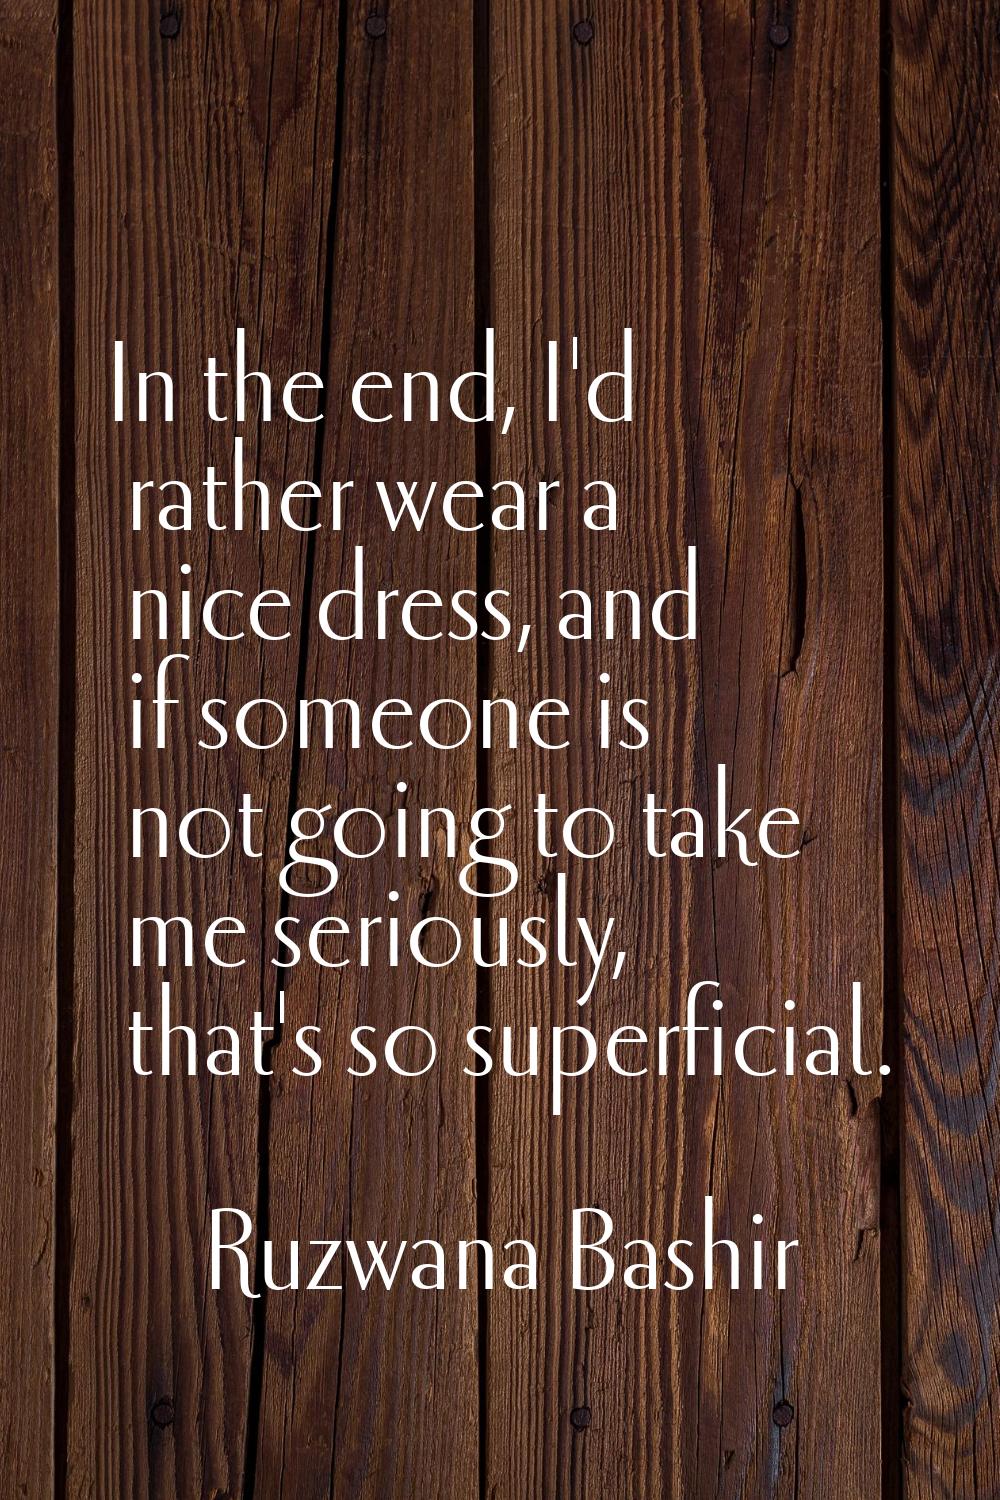 In the end, I'd rather wear a nice dress, and if someone is not going to take me seriously, that's 